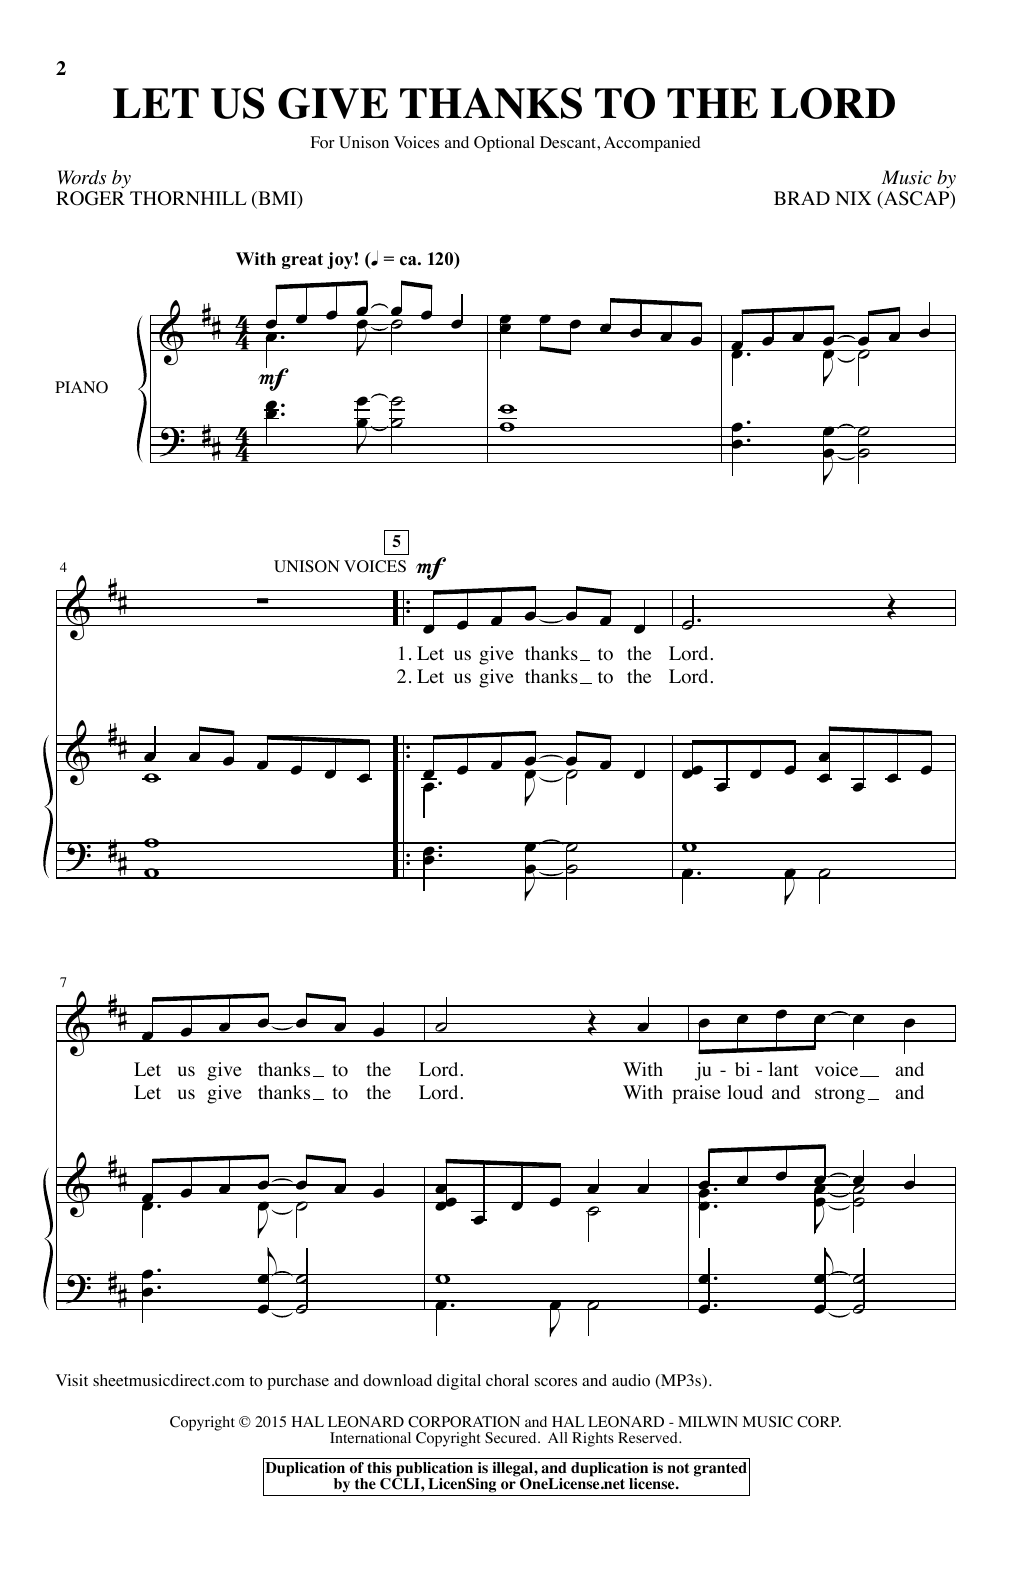 Download Brad Nix Let Us Give Thanks To The Lord Sheet Music